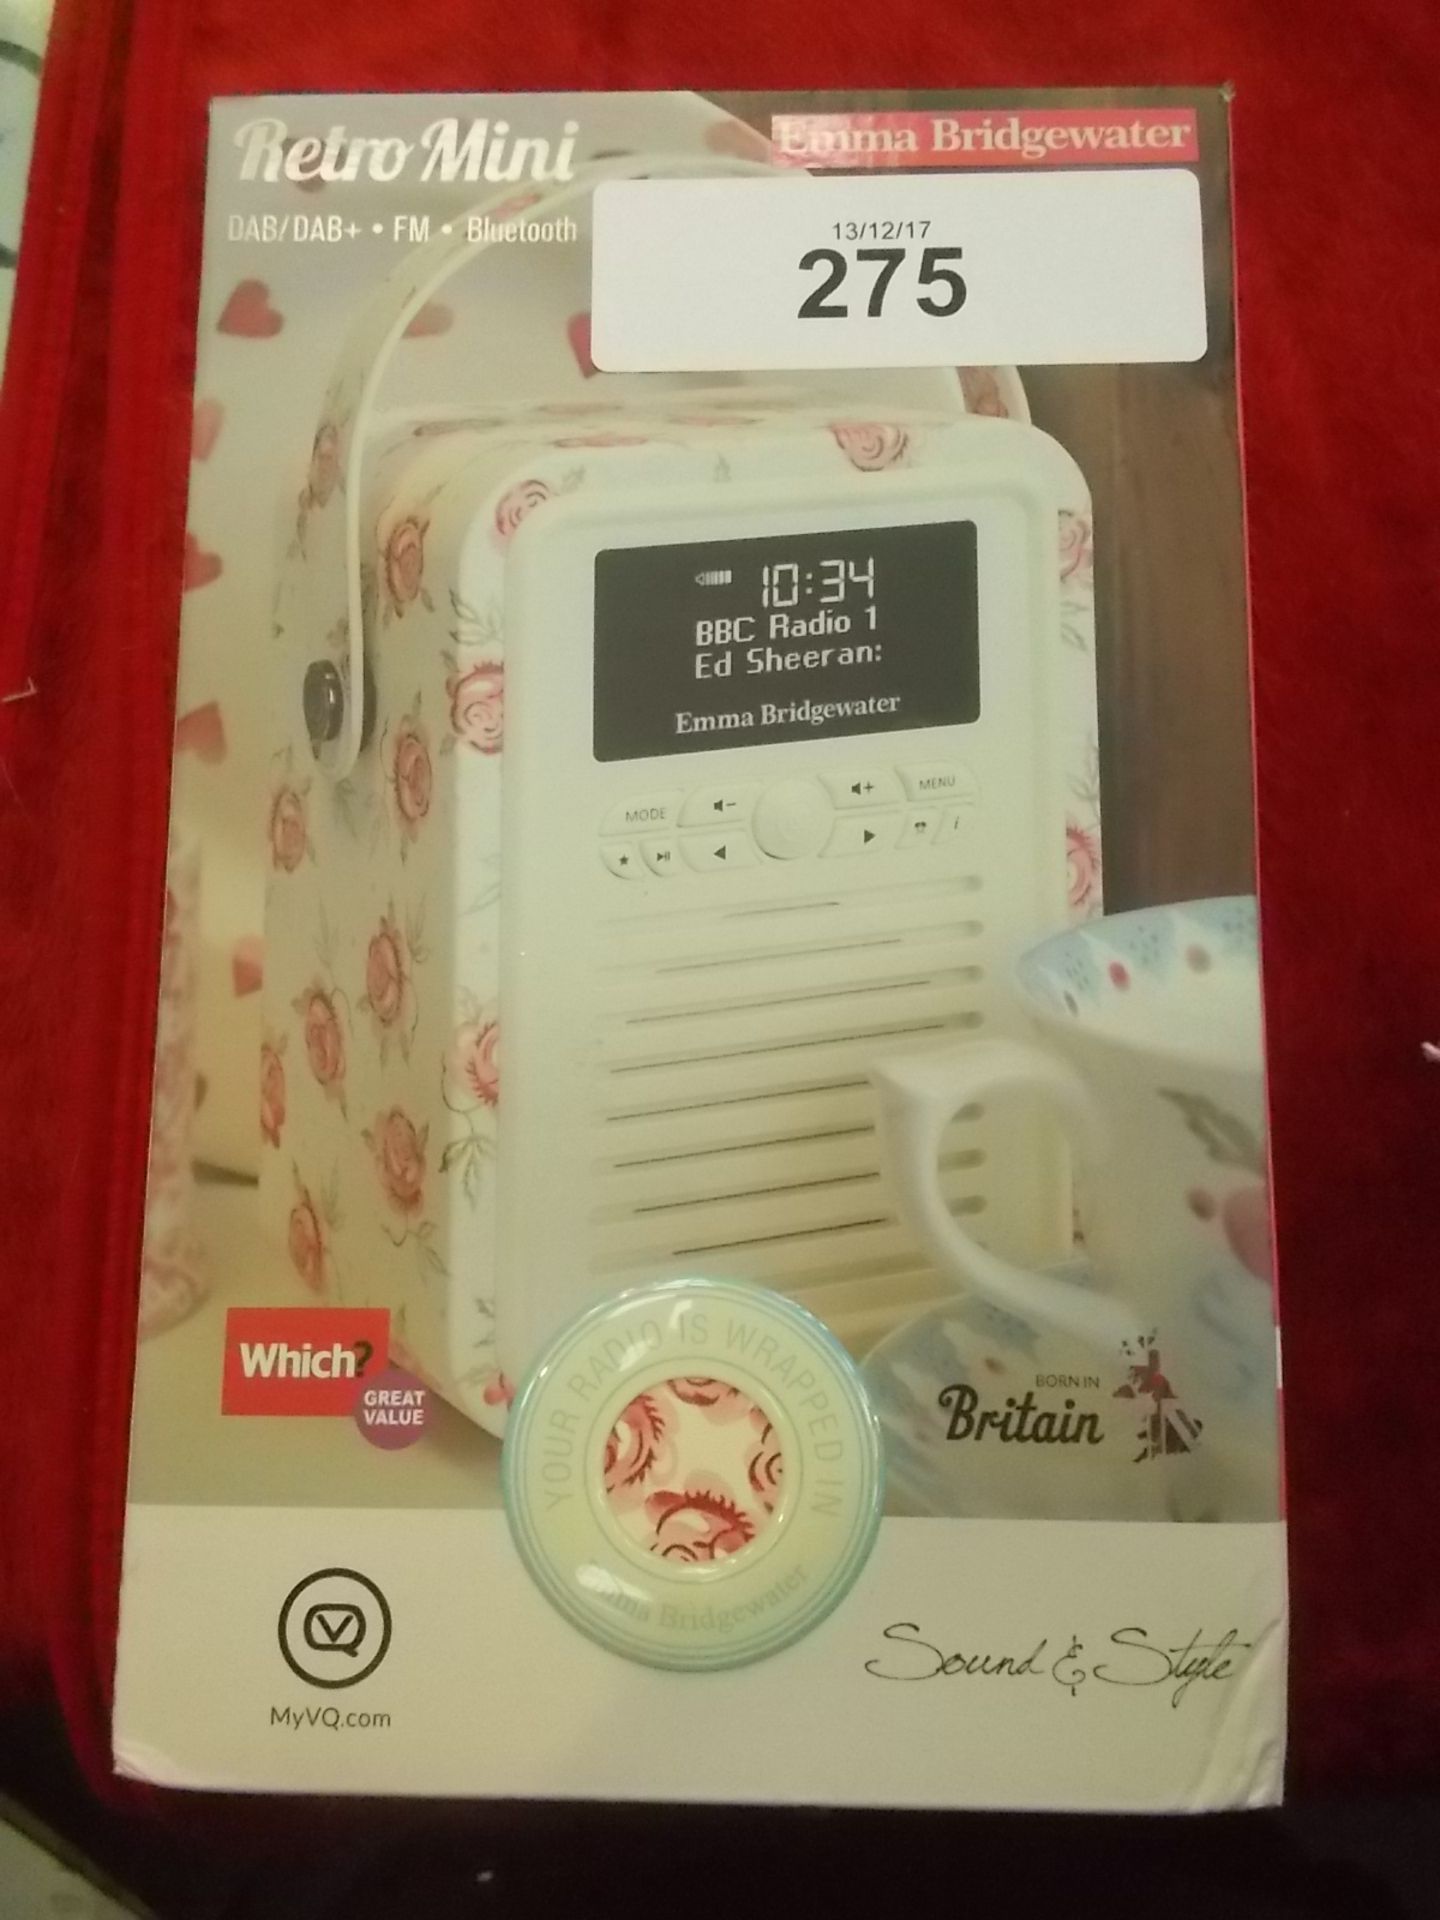 A VQ Retro mini DAB Emma Bridgewater radio, wrapped in rose and bee - Sealed new in box (C4)